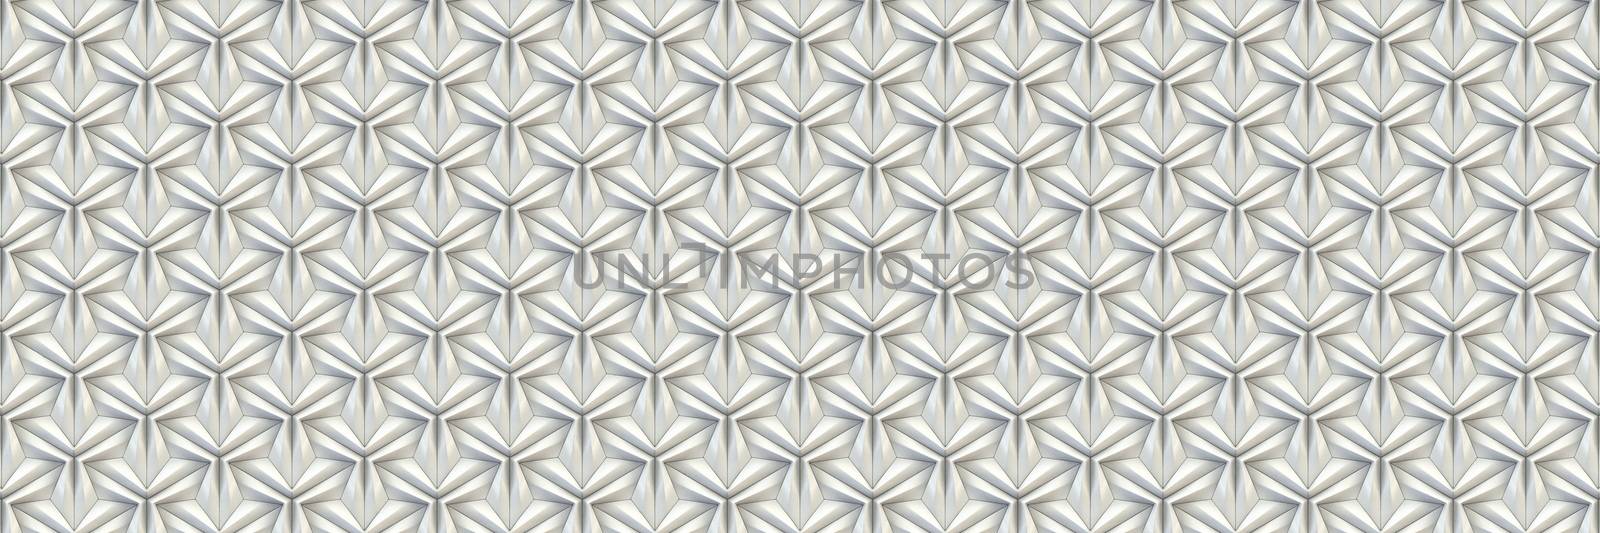 Abstract wall tiles texture background Textile 3D render illustration isolated